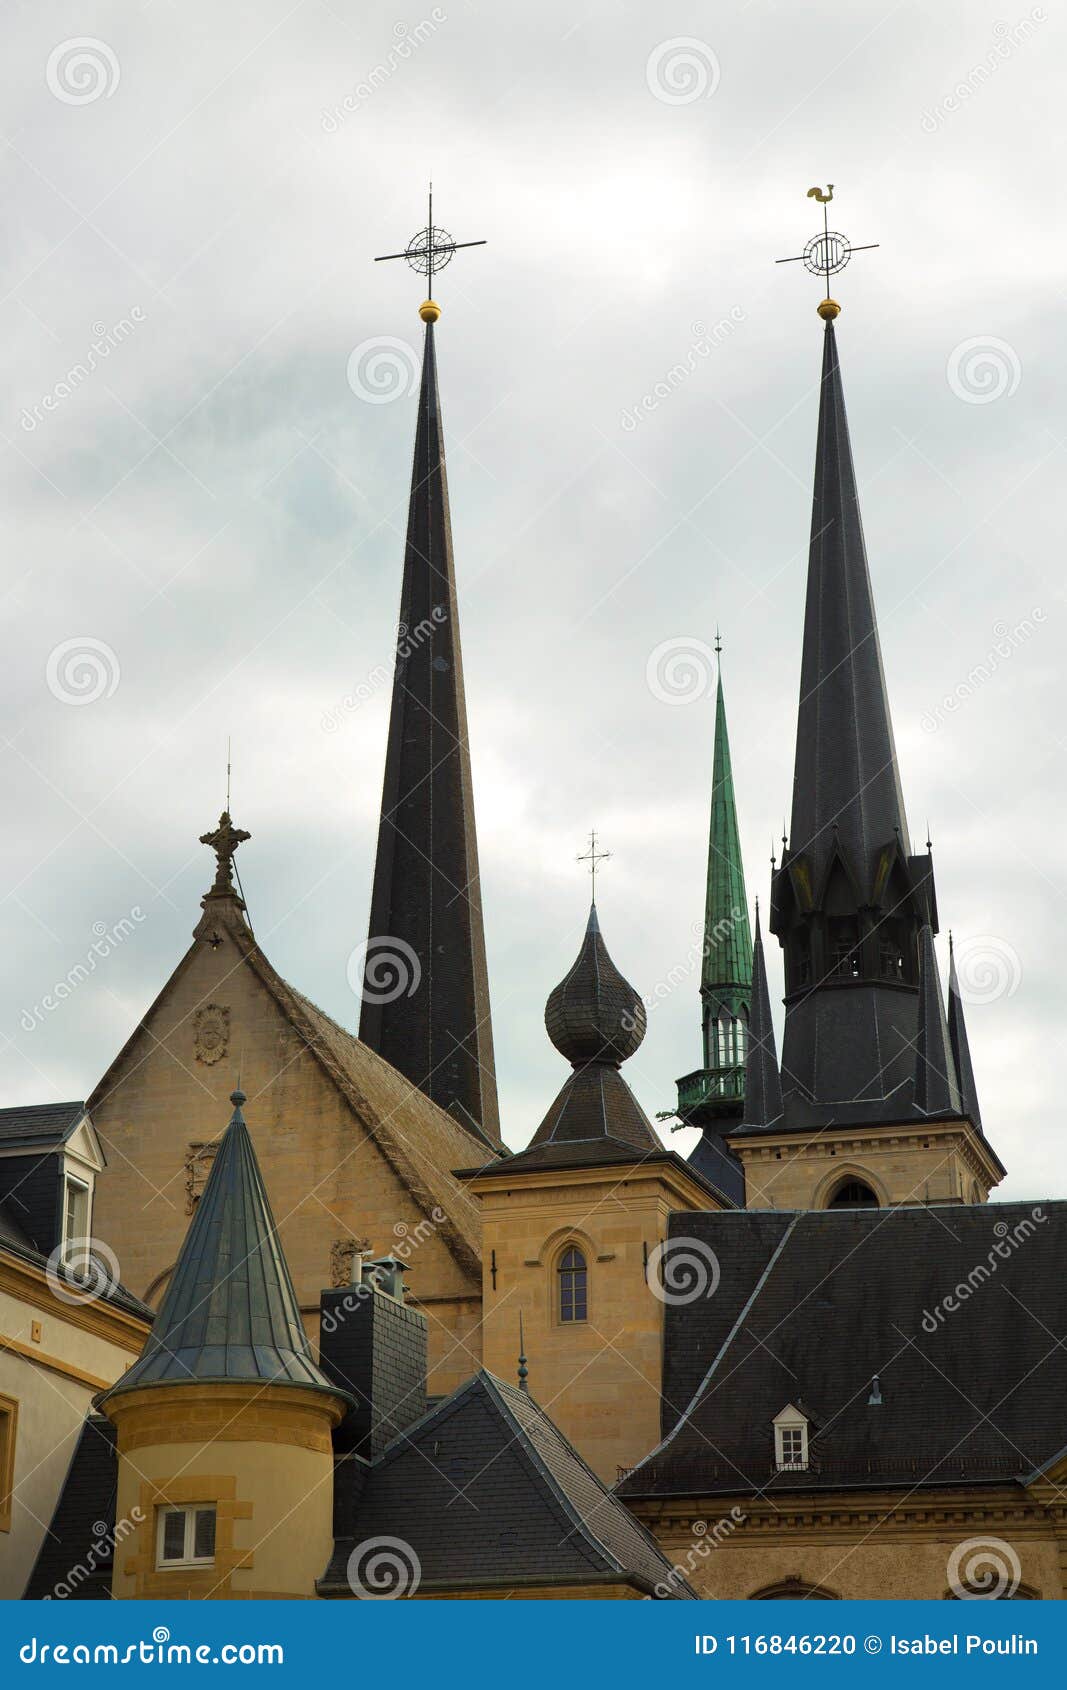 steeples in luxembourg in old town